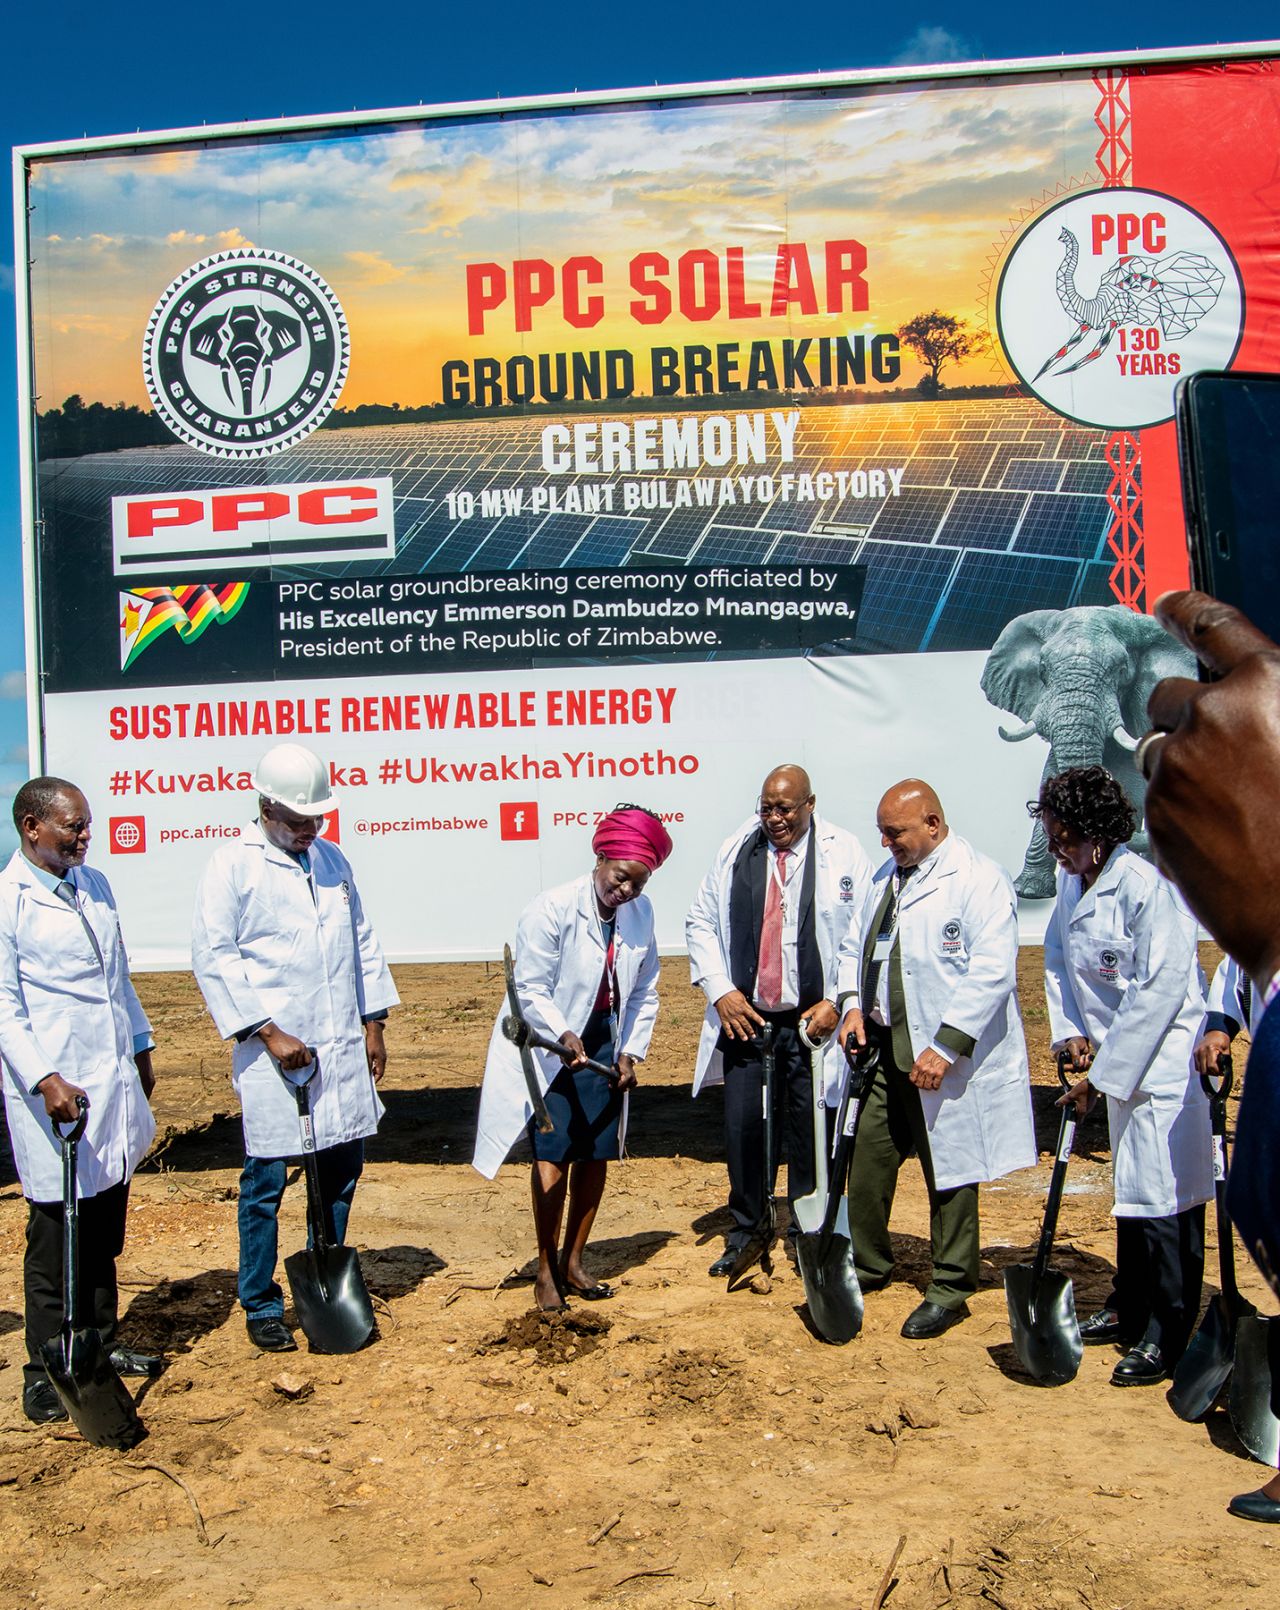 The groundbreaking ceremony was conducted by the Minister of Industry and Commerce, Dr Sekai Nzenza on the 26 April 2022.